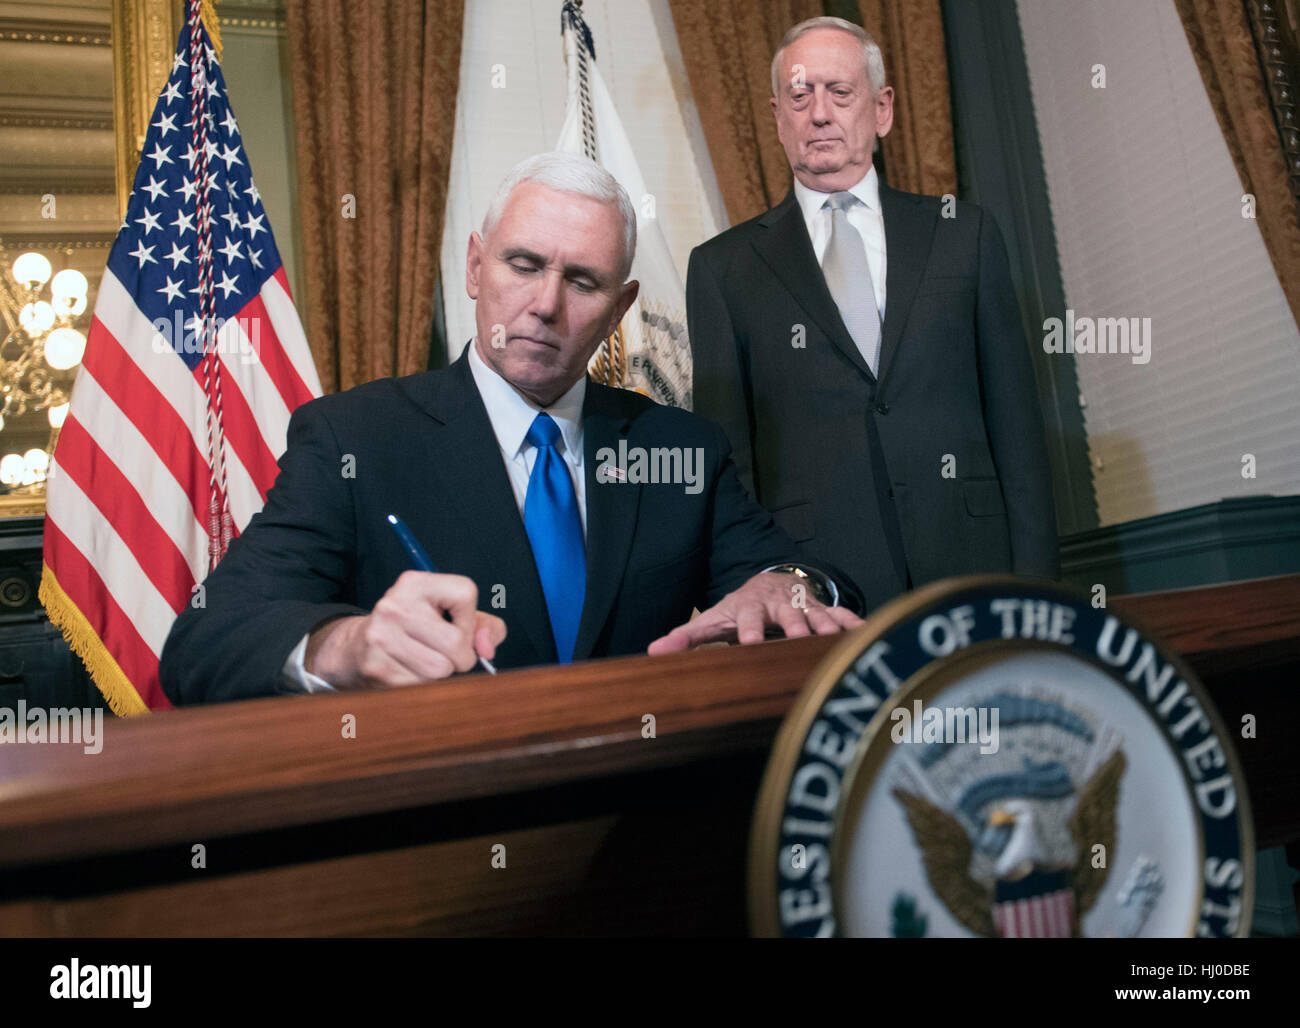 Washington, USA. 20th January, 2017. Vice President Mike Pence signs confirmation paper work for Marine Corps General James Mattis, after swearing him in as Defense Secretary, in the Vice Presidential ceremonial office in the Executive Office Building in Washington, DC on January 20, 2017. Photo by Kevin Dietsch/UPI /CNP/MediaPunch Credit: MediaPunch Inc/Alamy Live News Stock Photo